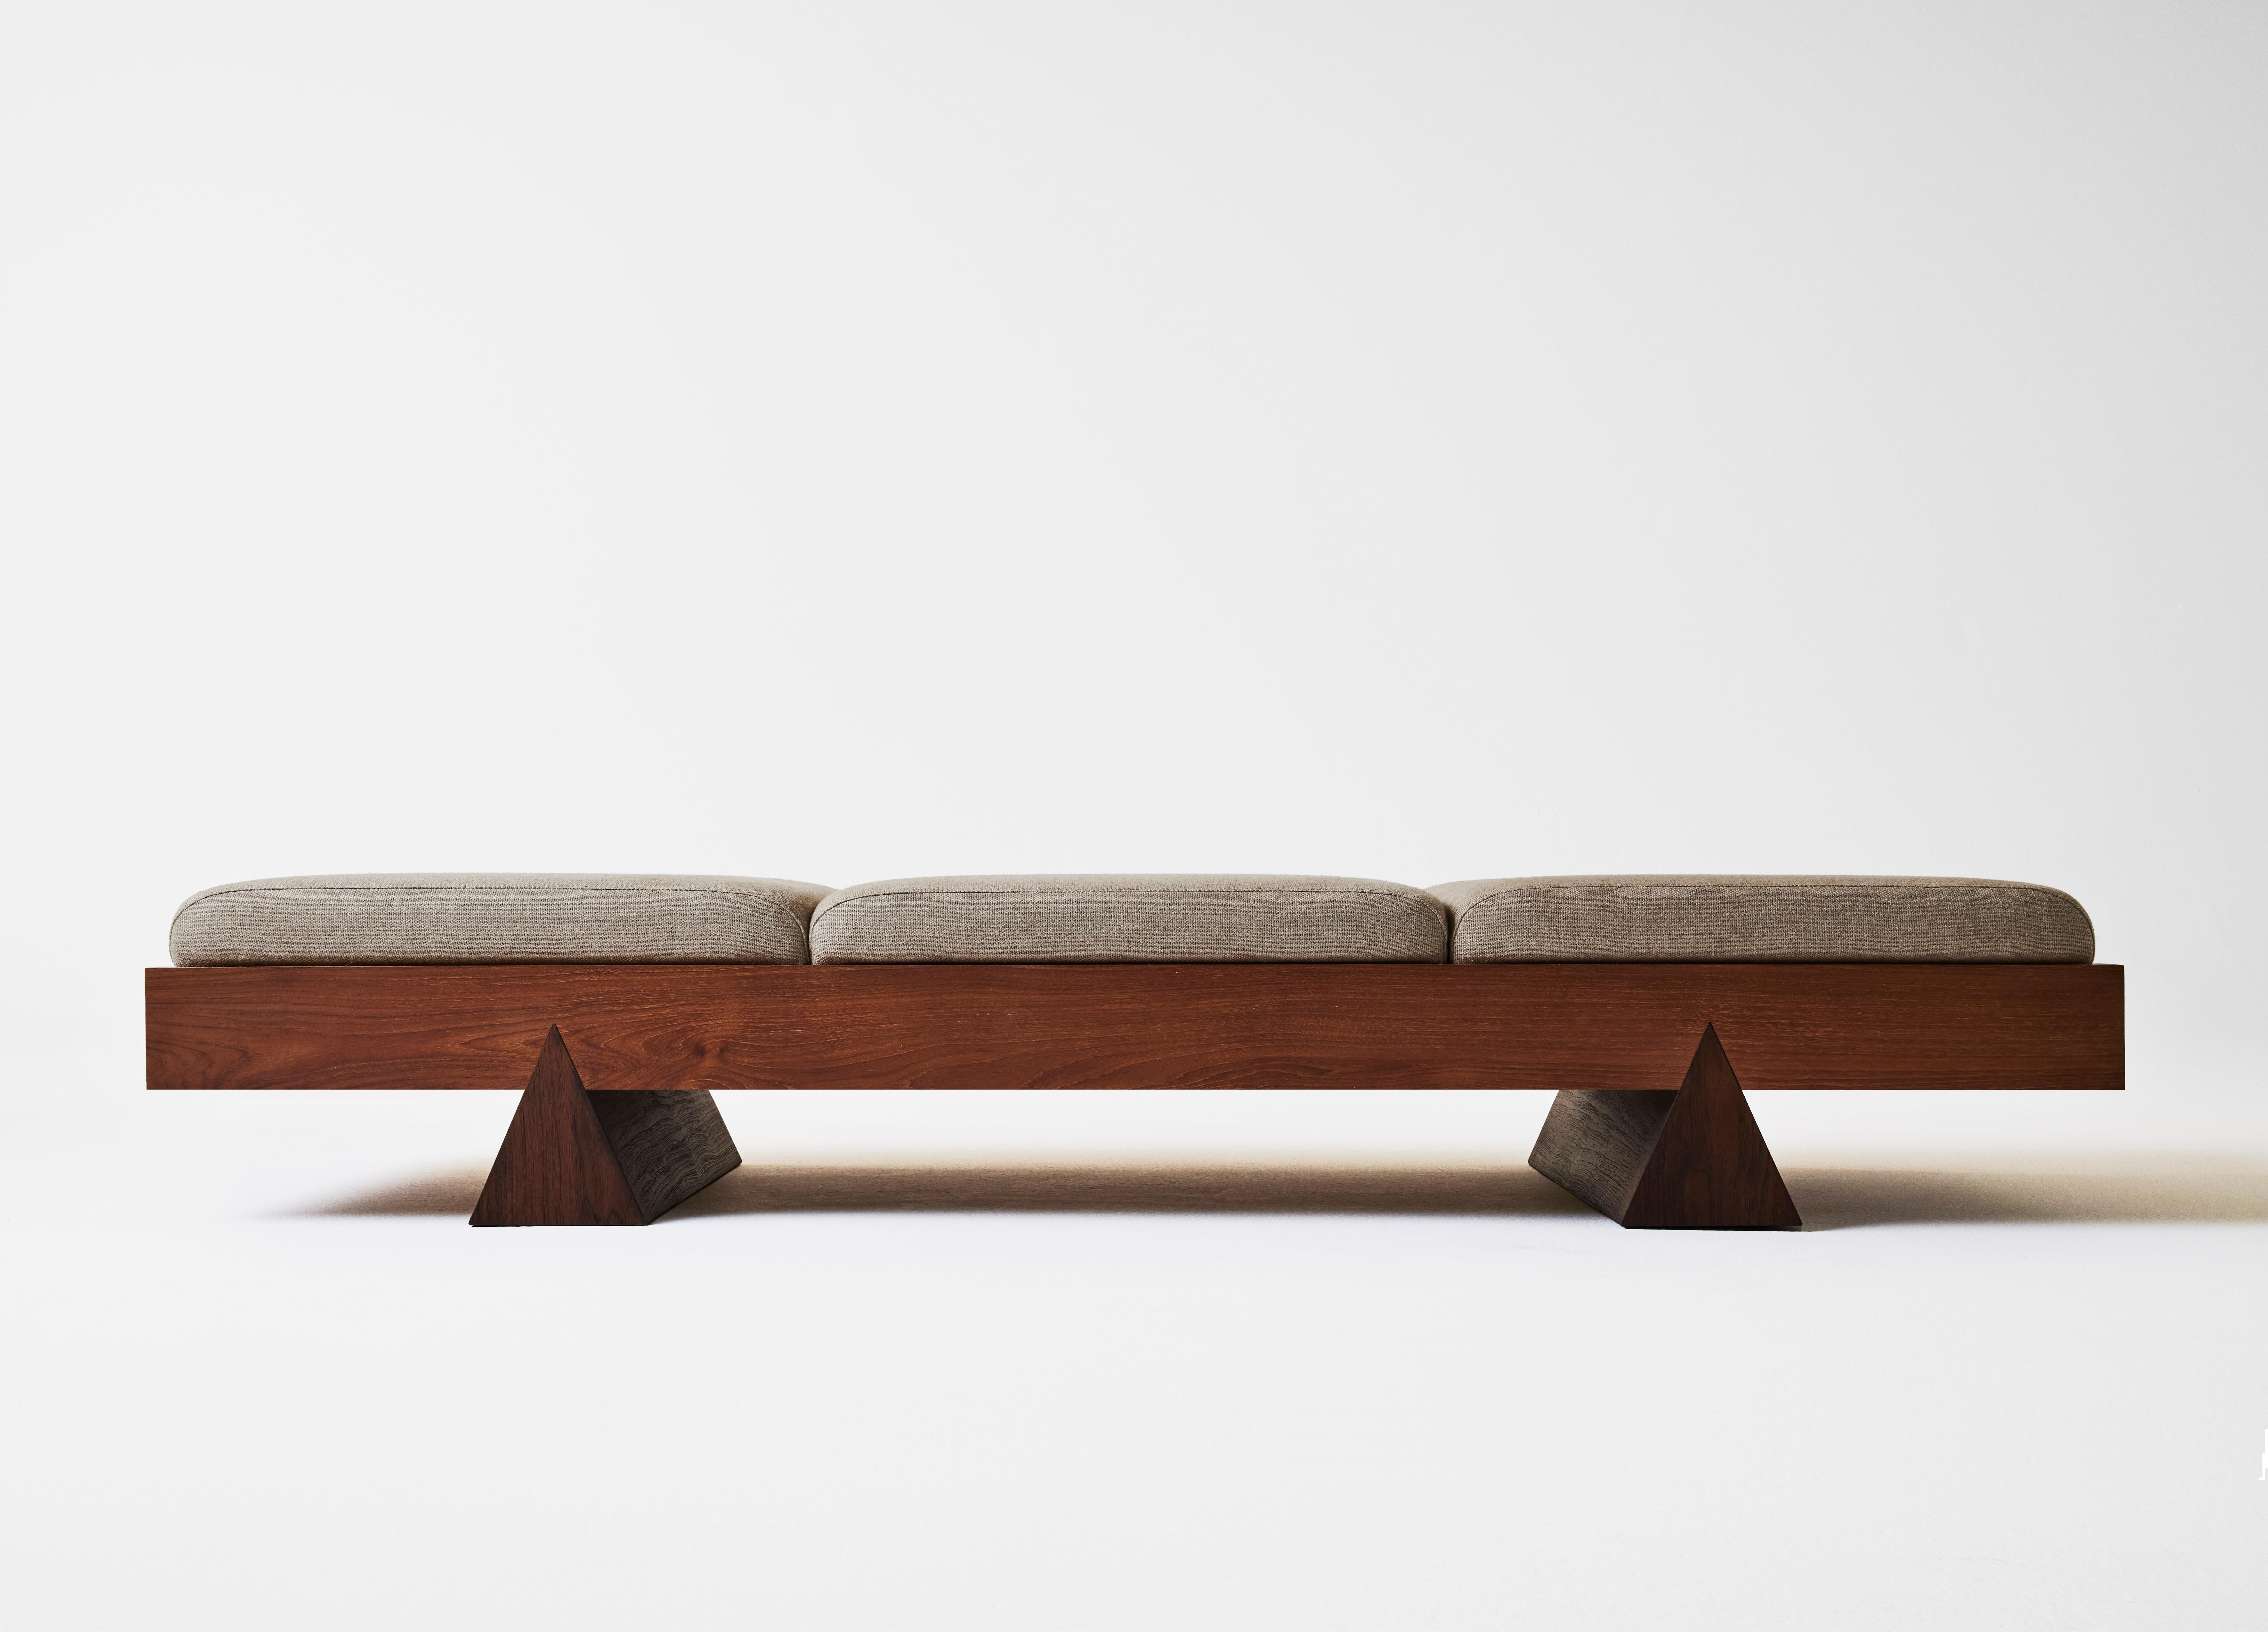 The Dvaya Bench embodies duality through its thoughtful design where contrast and equilibrium coalesce. This piece exhibits an intriguing play on scale, where a substantial wooden frame is gracefully supported by triadic legs. The generous seating